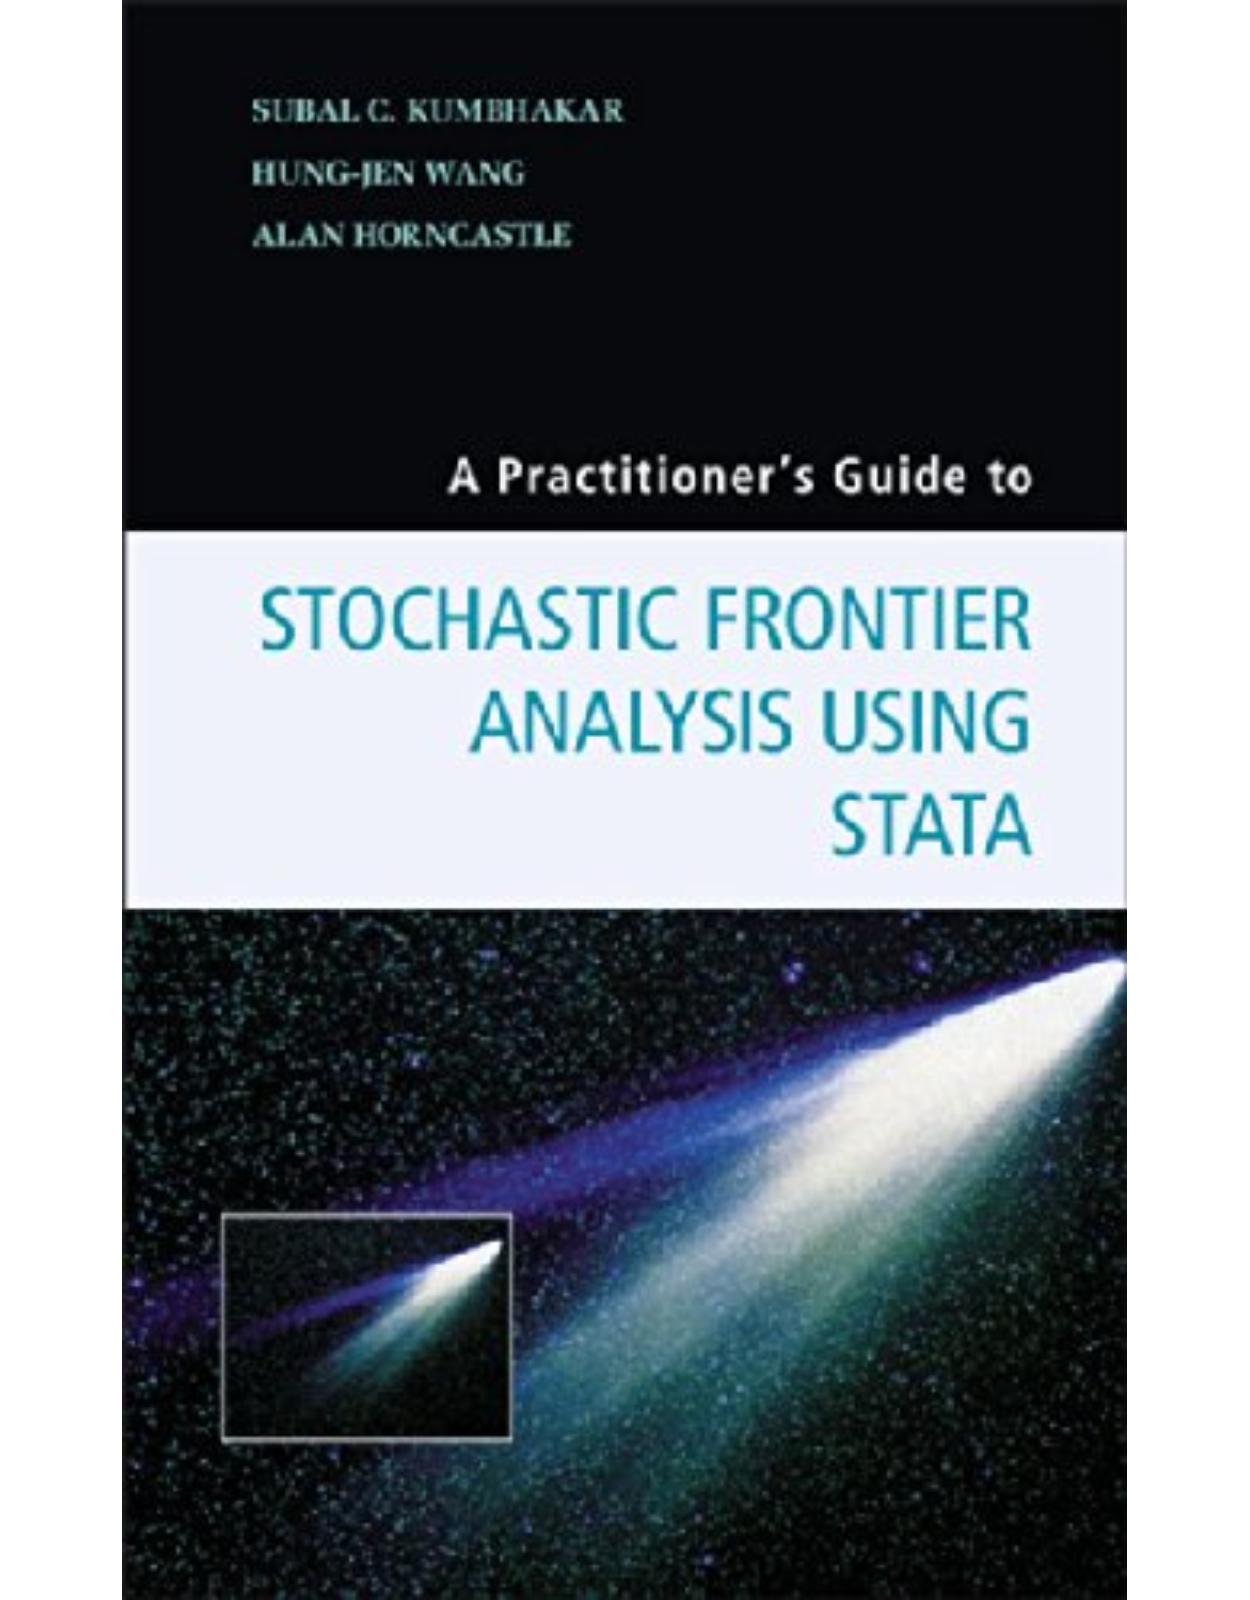 A Practitioner's Guide to Stochastic Frontier Analysis Using Stata 